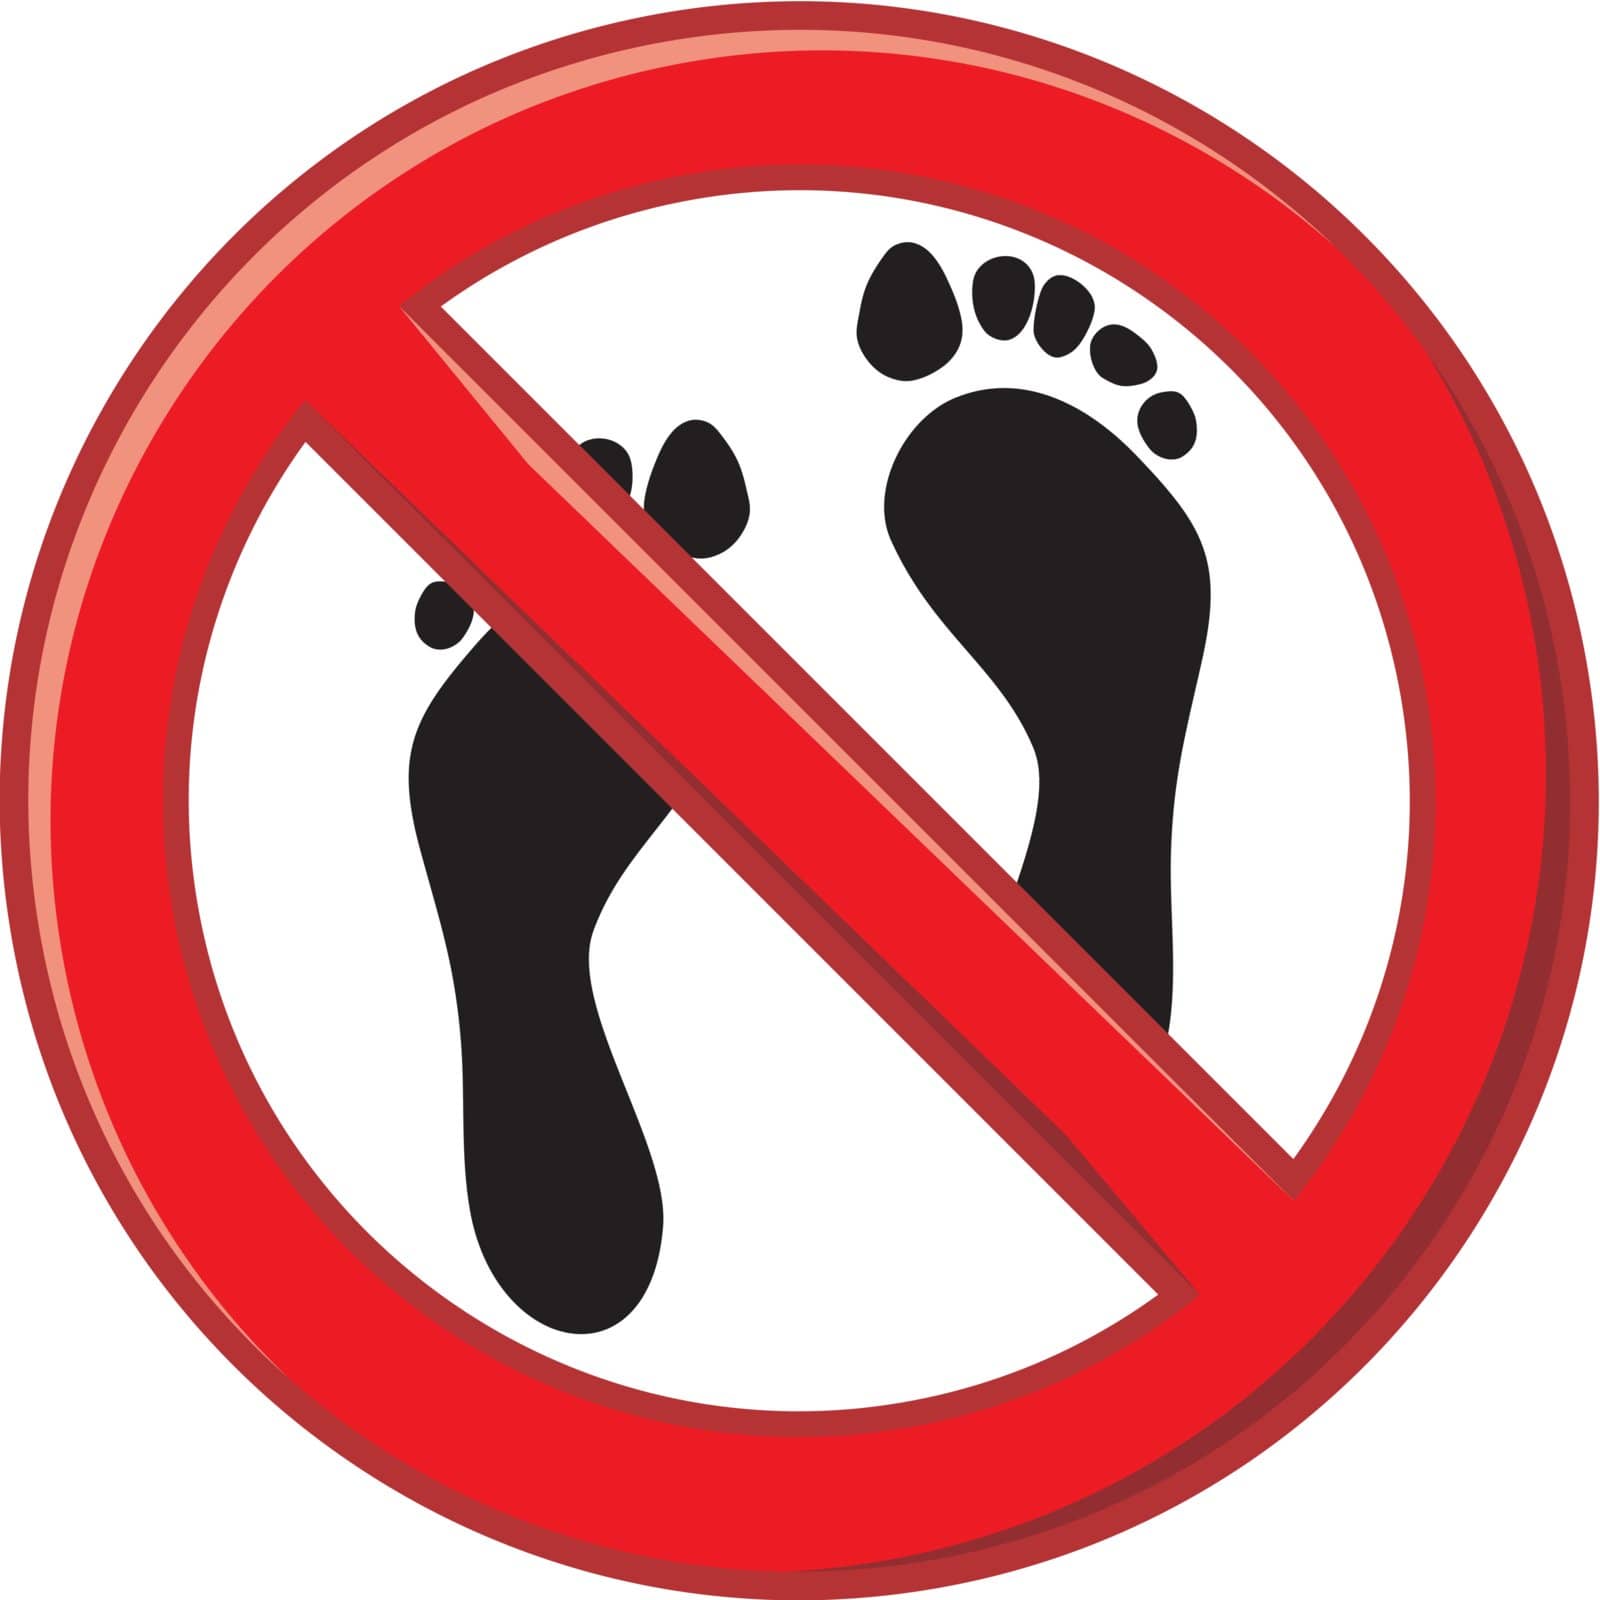 Prohibition of walking barefoot by ard1